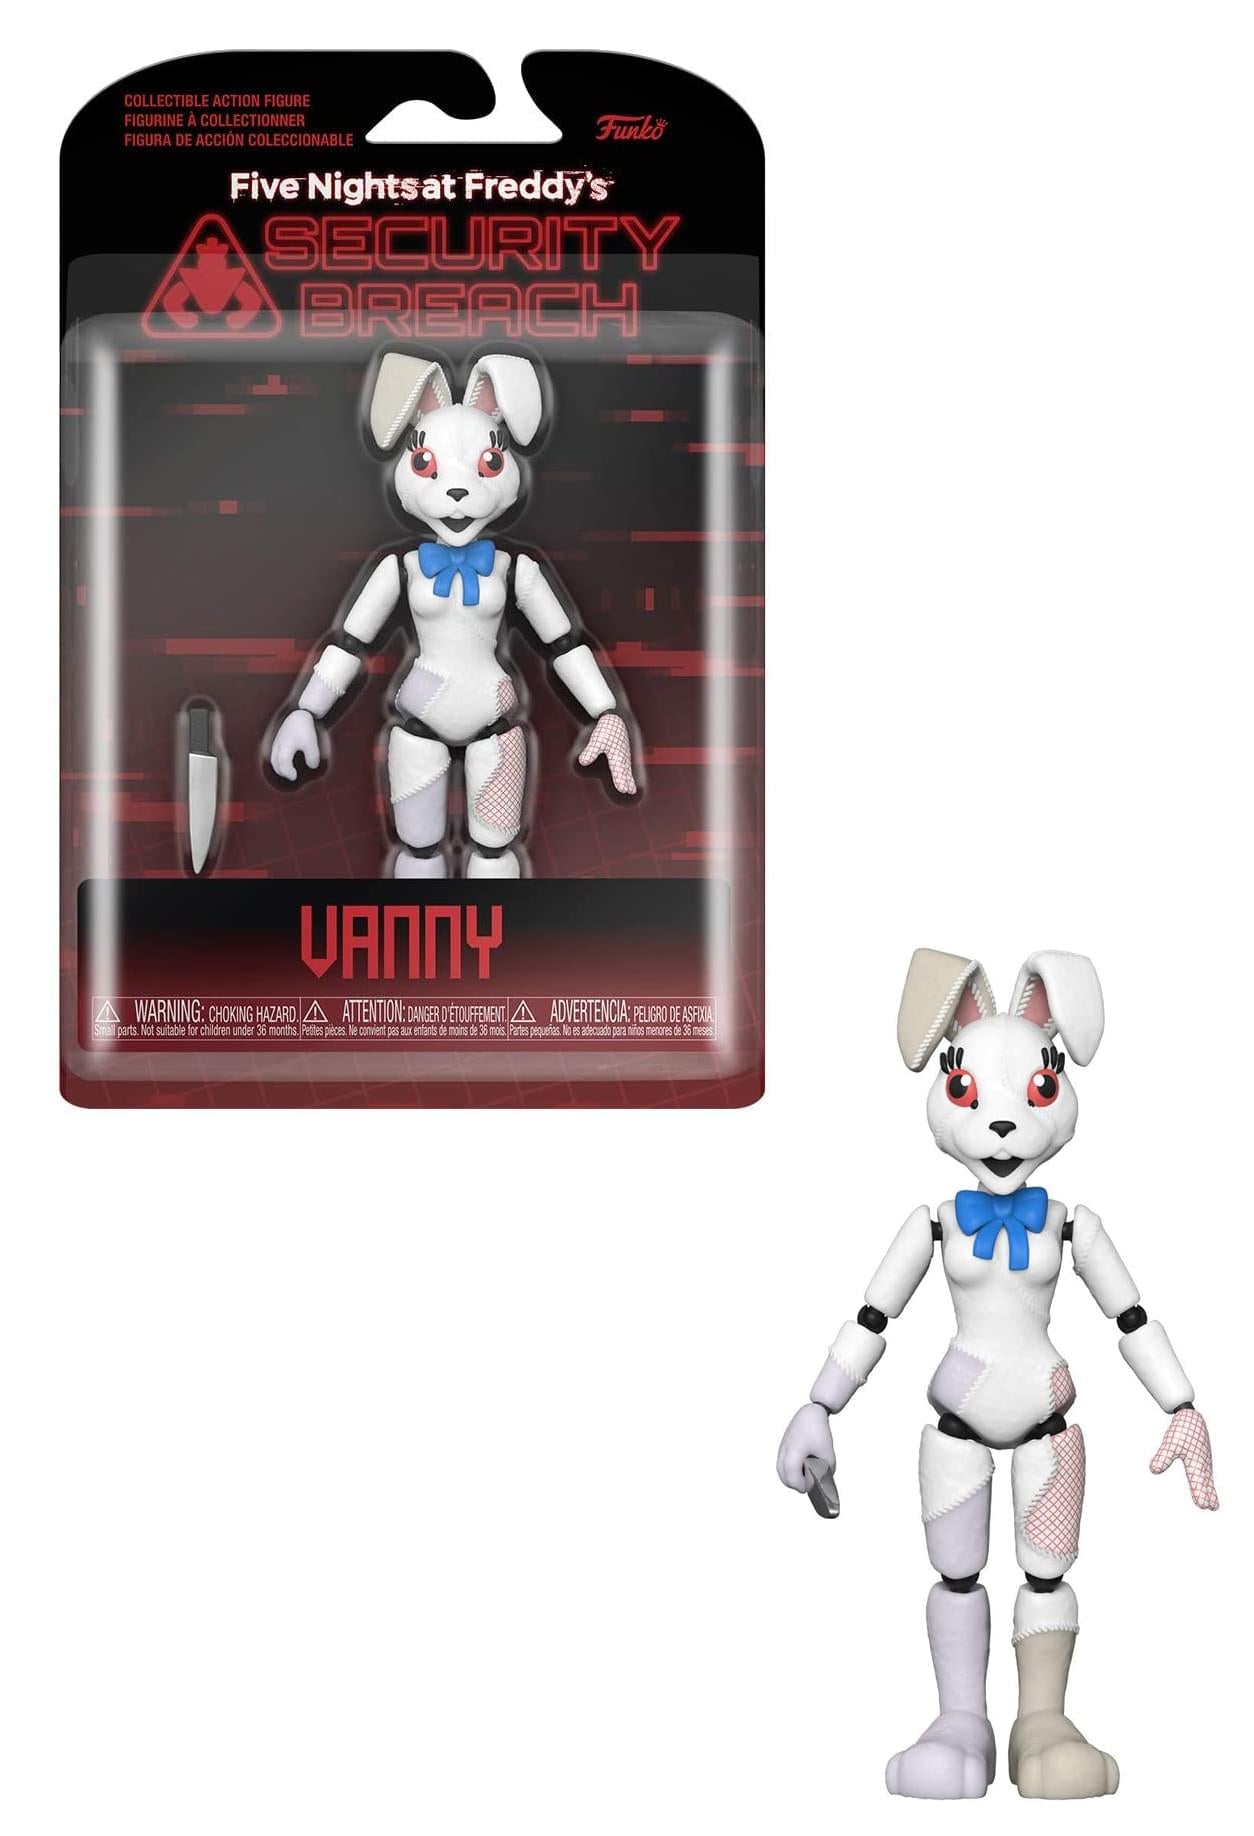 Five Nights at Freddys Security Breach 5.5 Inch Action Figure | Vanny